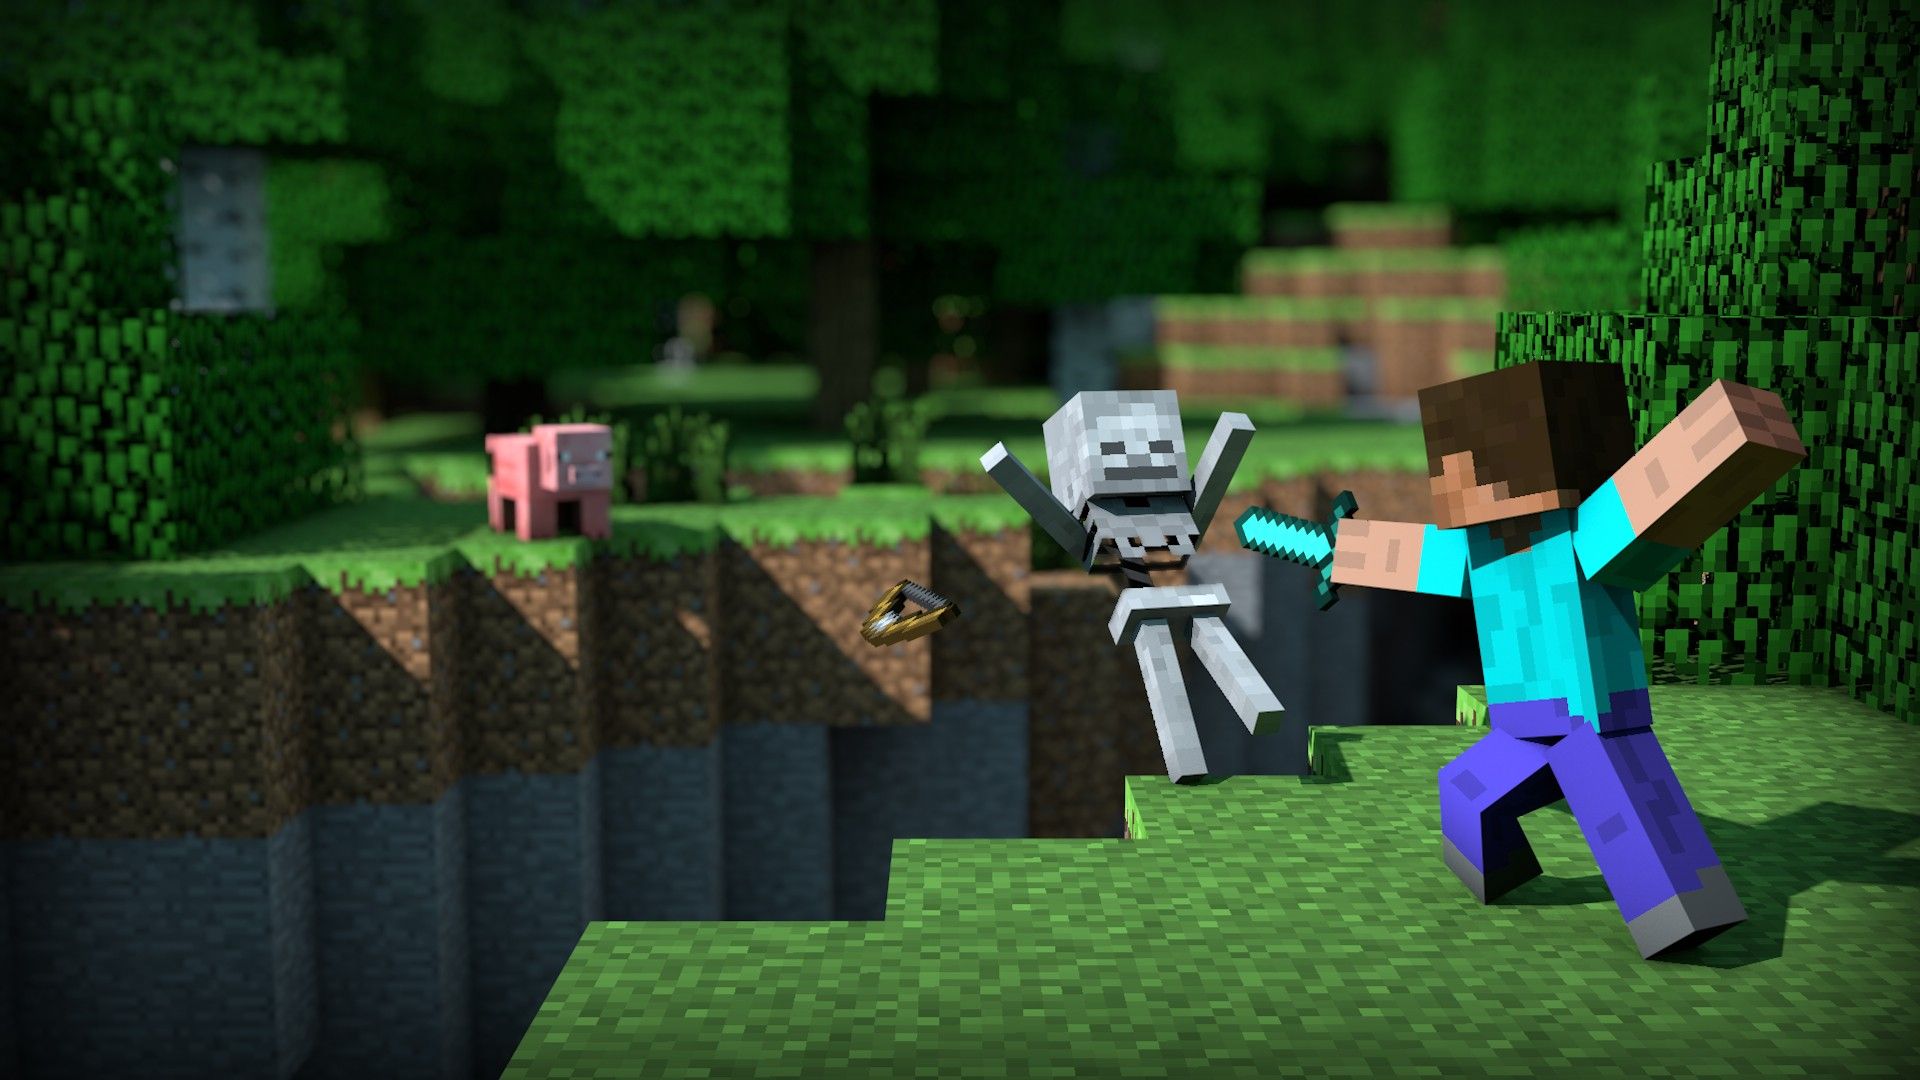 Download wallpaper from game Minecraft with tags: Windows, Windows